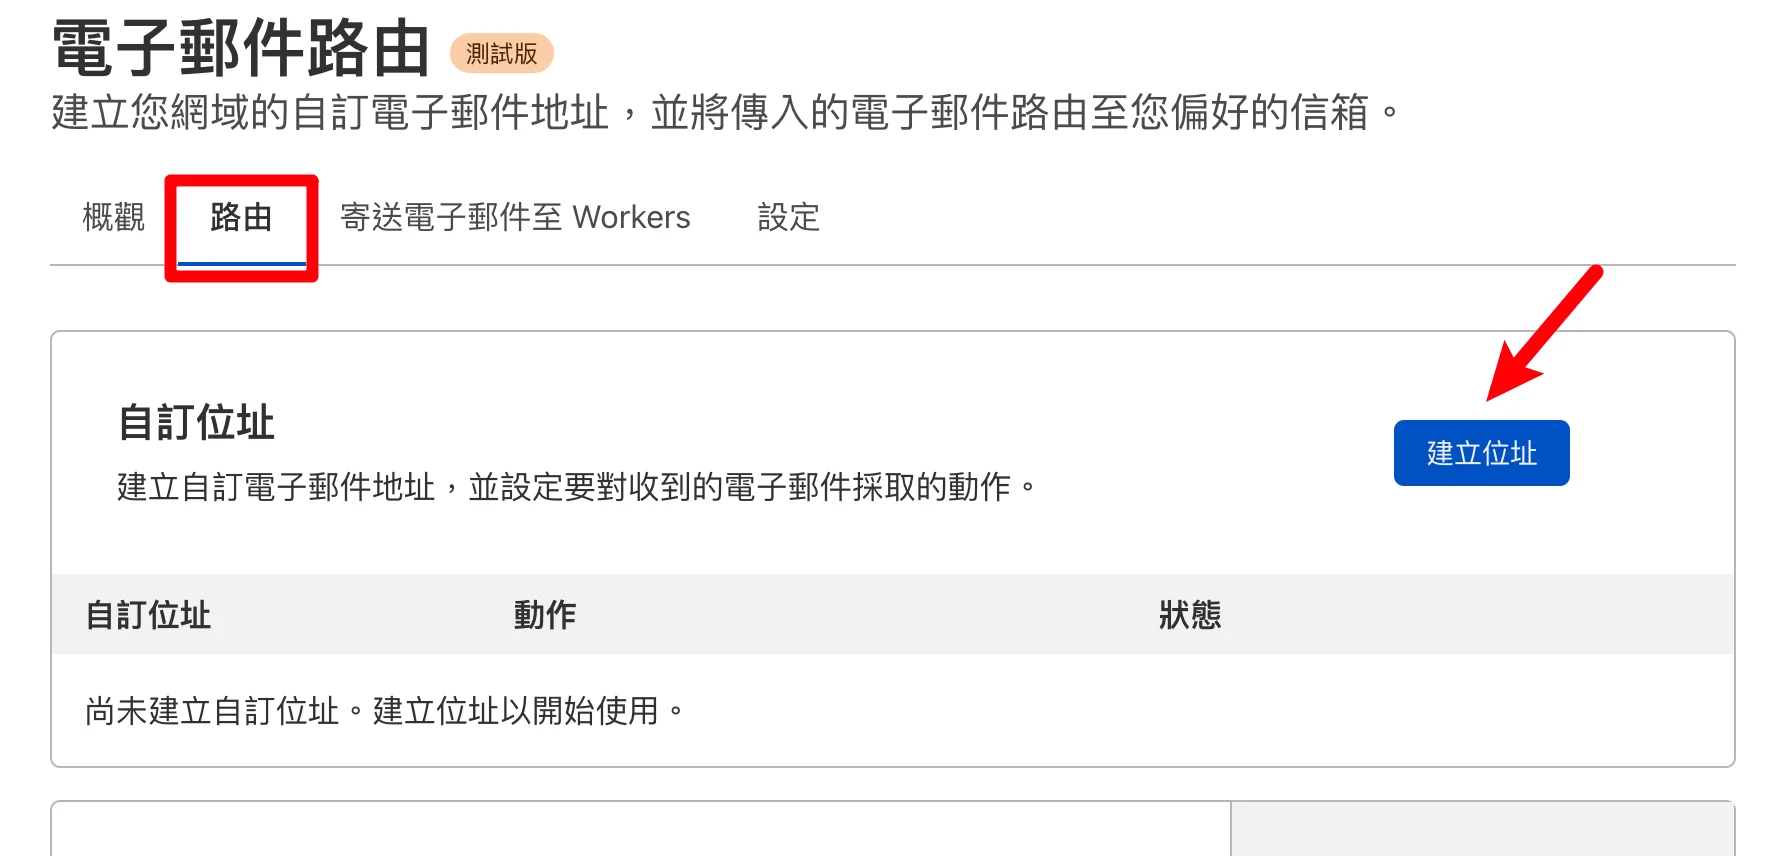 Cloudflare Email Routing 電子郵件路由，可免費自訂網域信箱！ 13